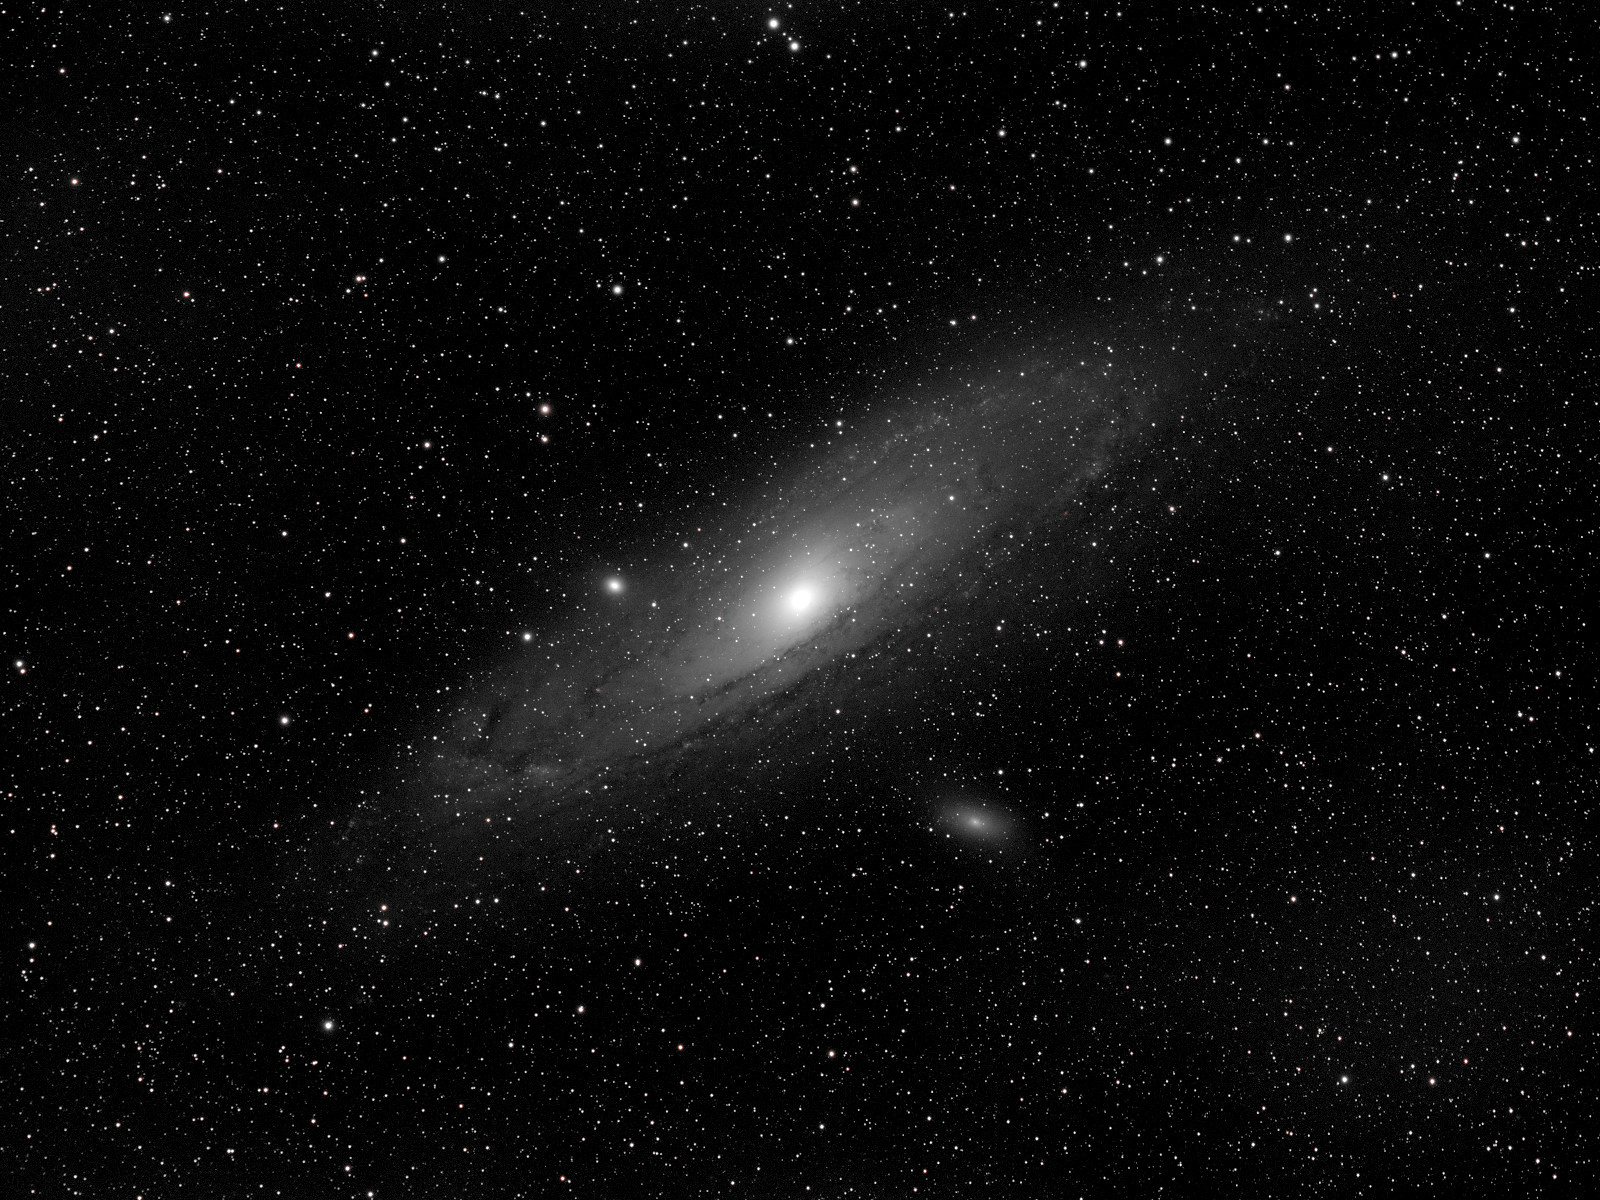 Improved image of M31